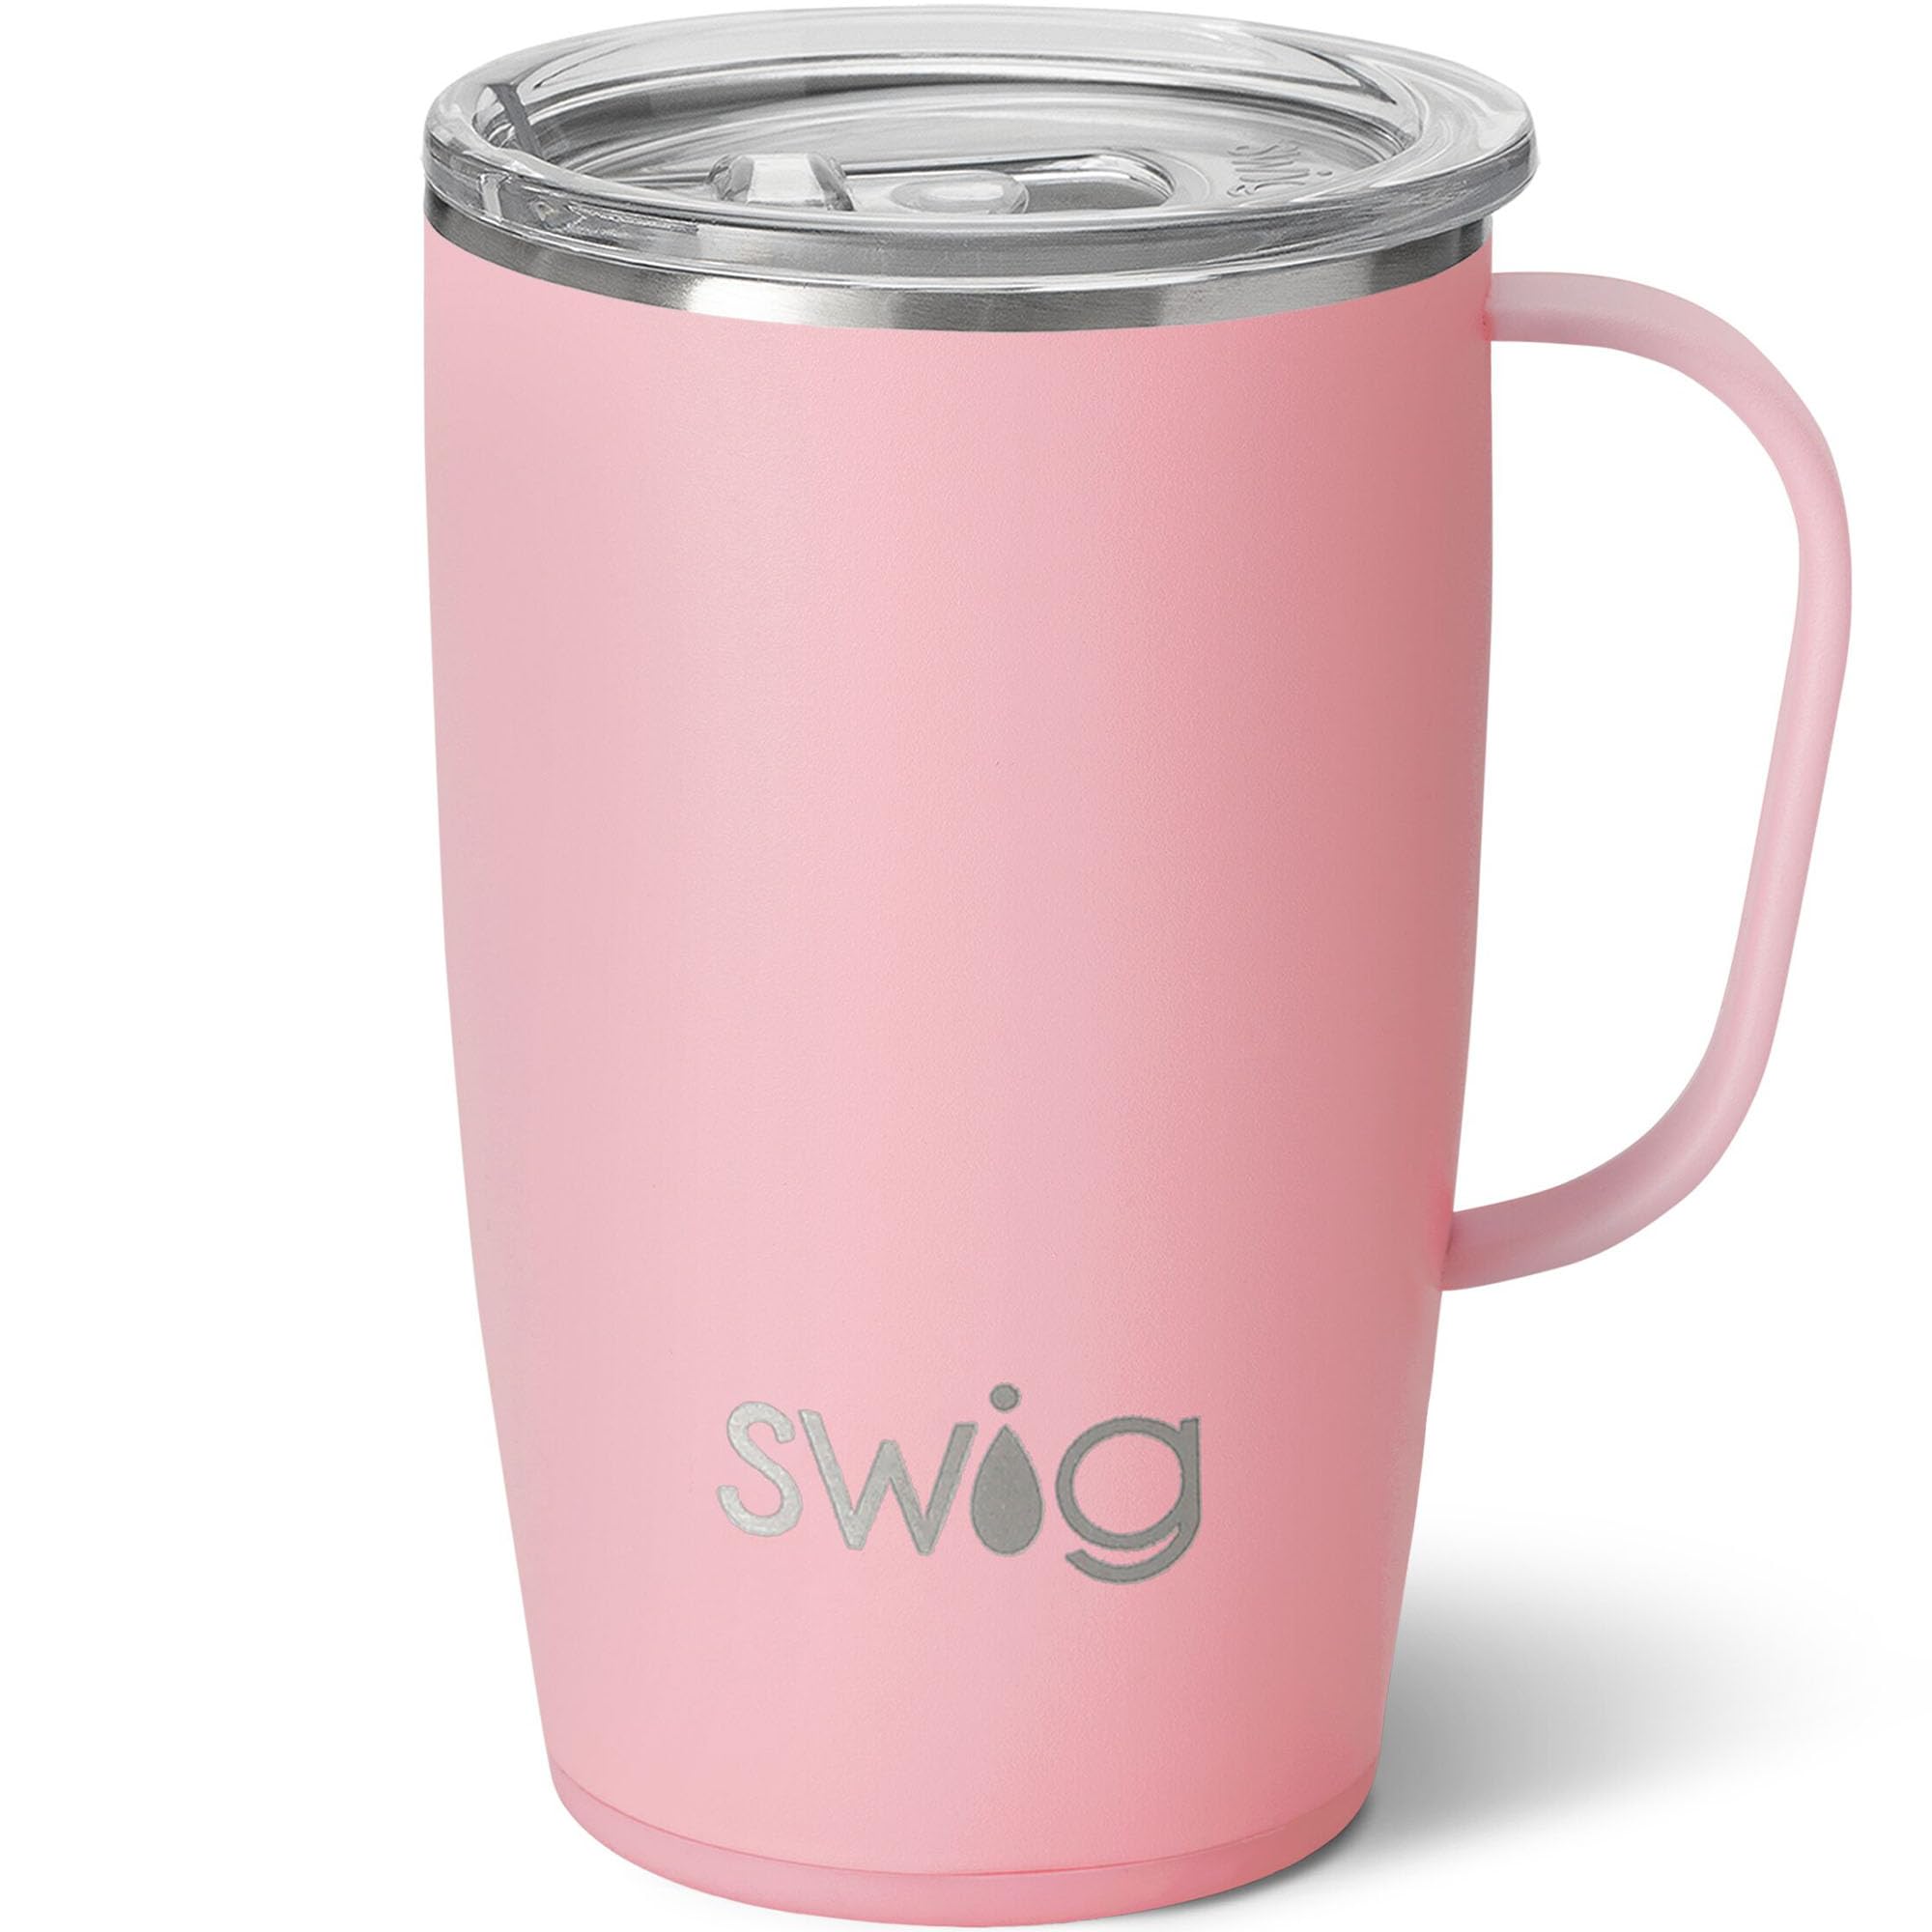 Swig 18oz Travel Mug, Insulated Tumbler with Handle and Lid, Cup Holder Friendly, Dishwasher Safe, Stainless Steel Insulated Coffee Mug with Lid and Handle (Blush)